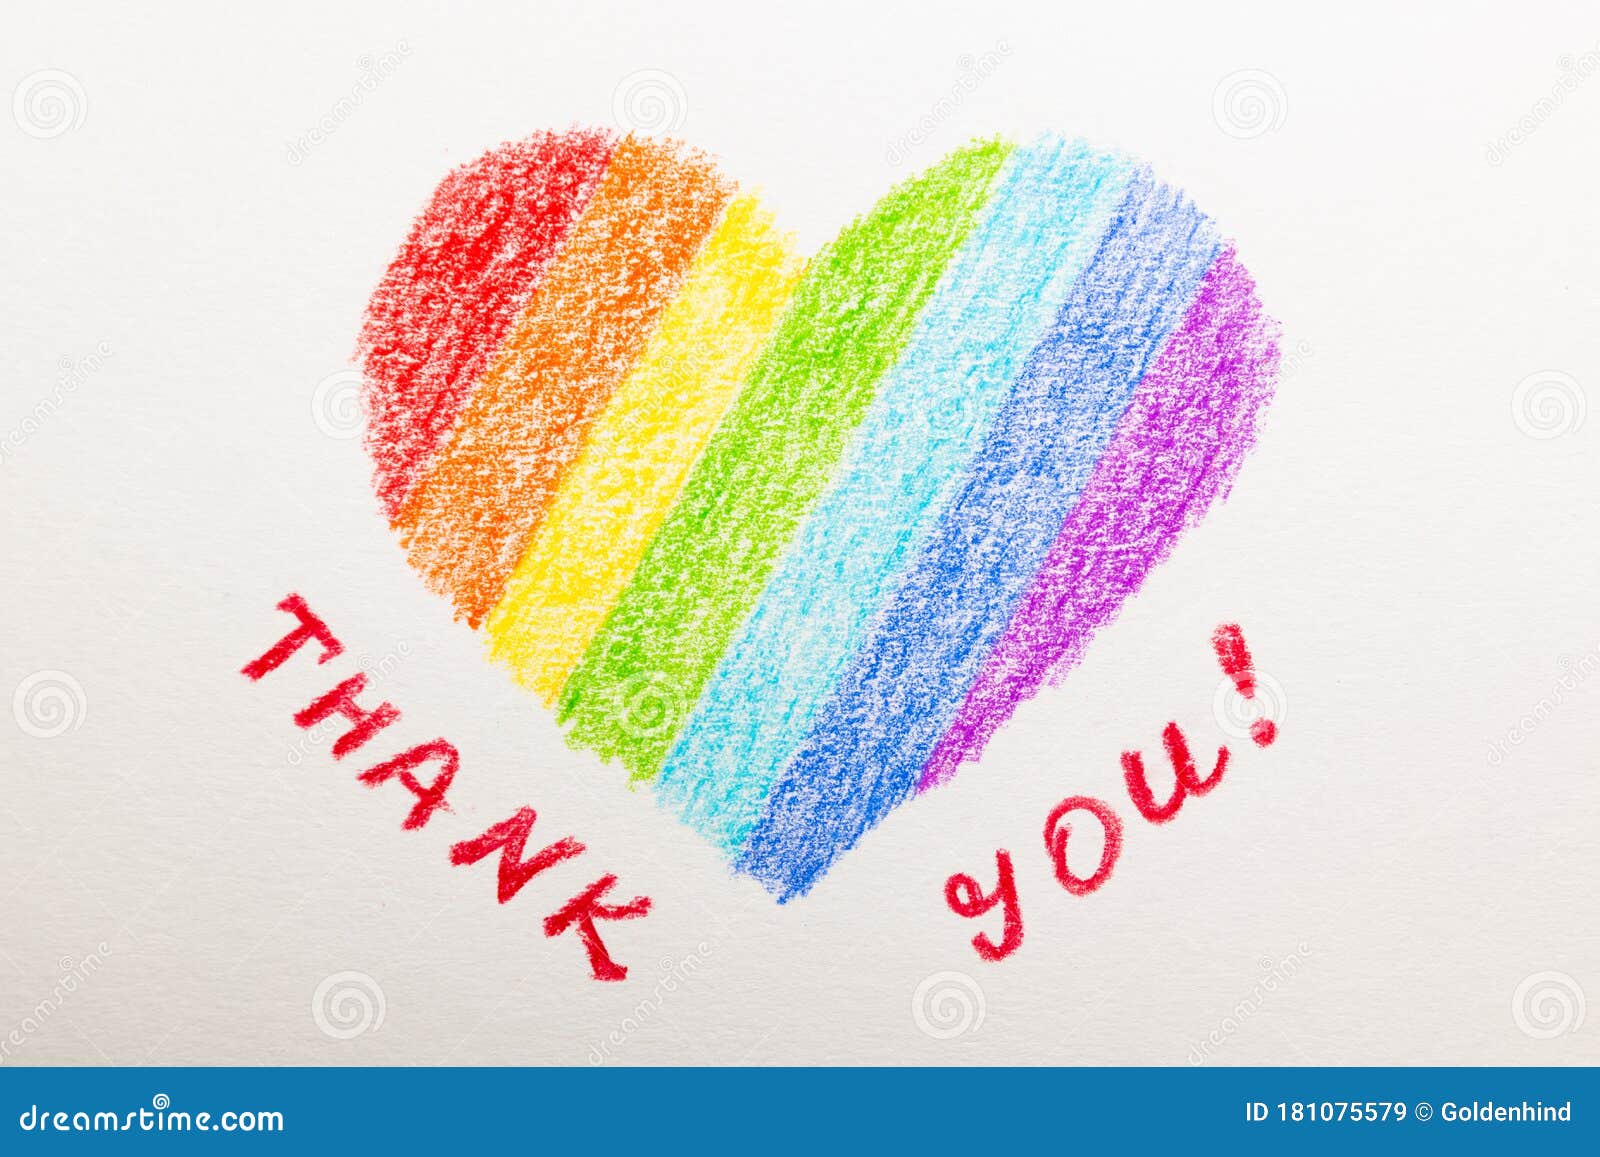 the hand drawn rainbow heart poster. thank you nhs staff for your service in face of worldwide coronavirus crisis